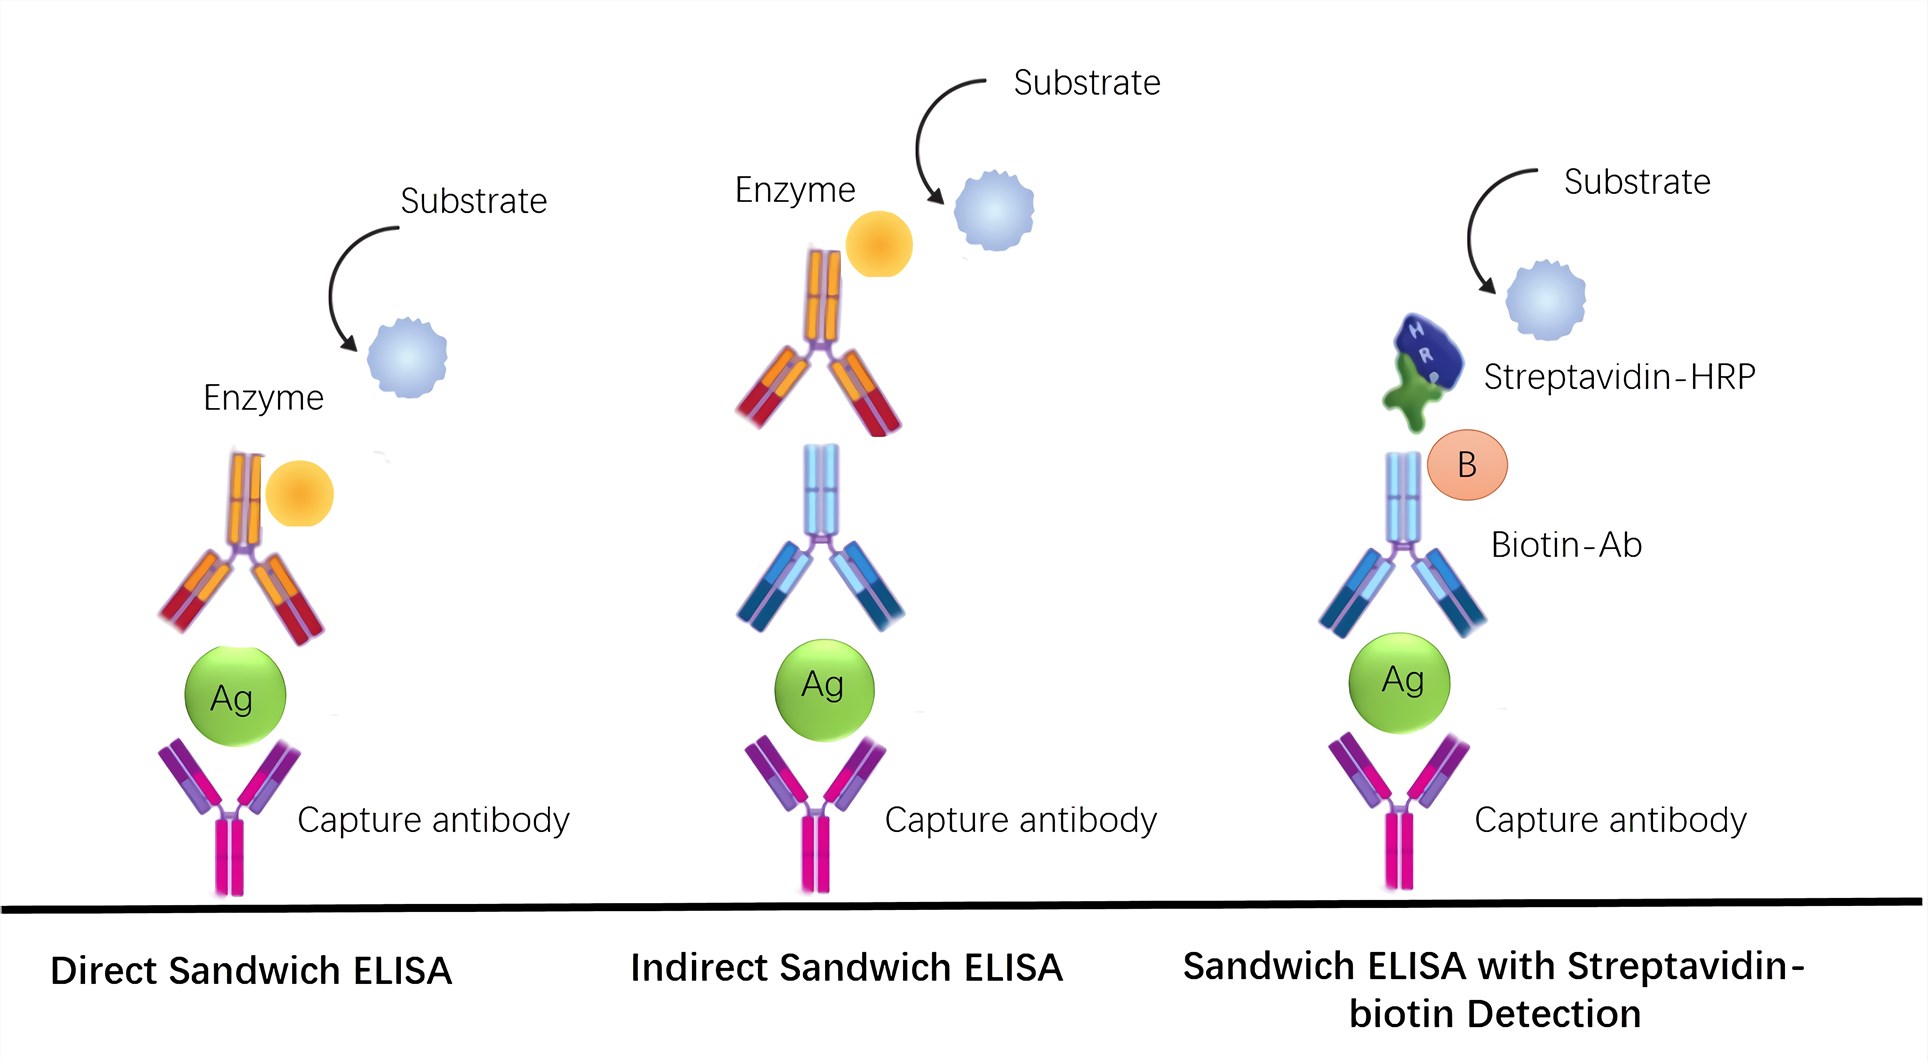 Normal modes and signal amplification mode of sandwich ELISA.